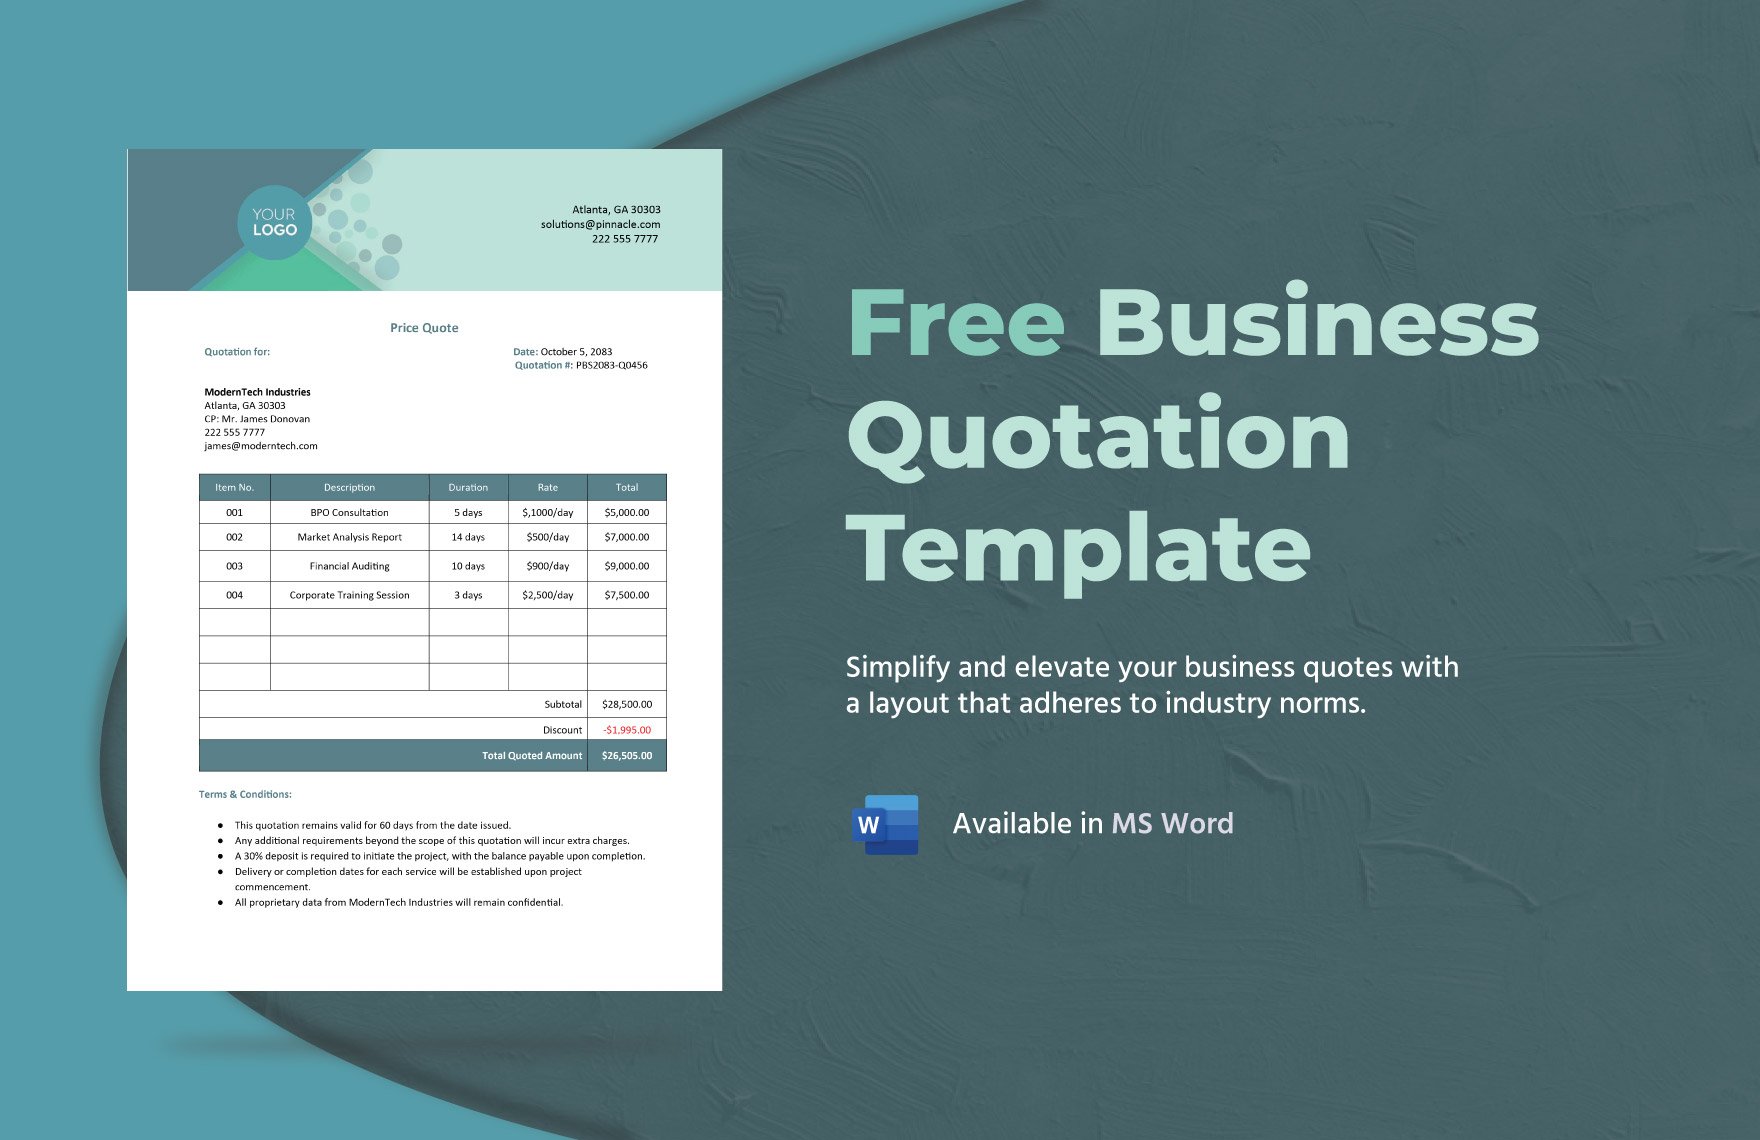 Free Business Quotation Template